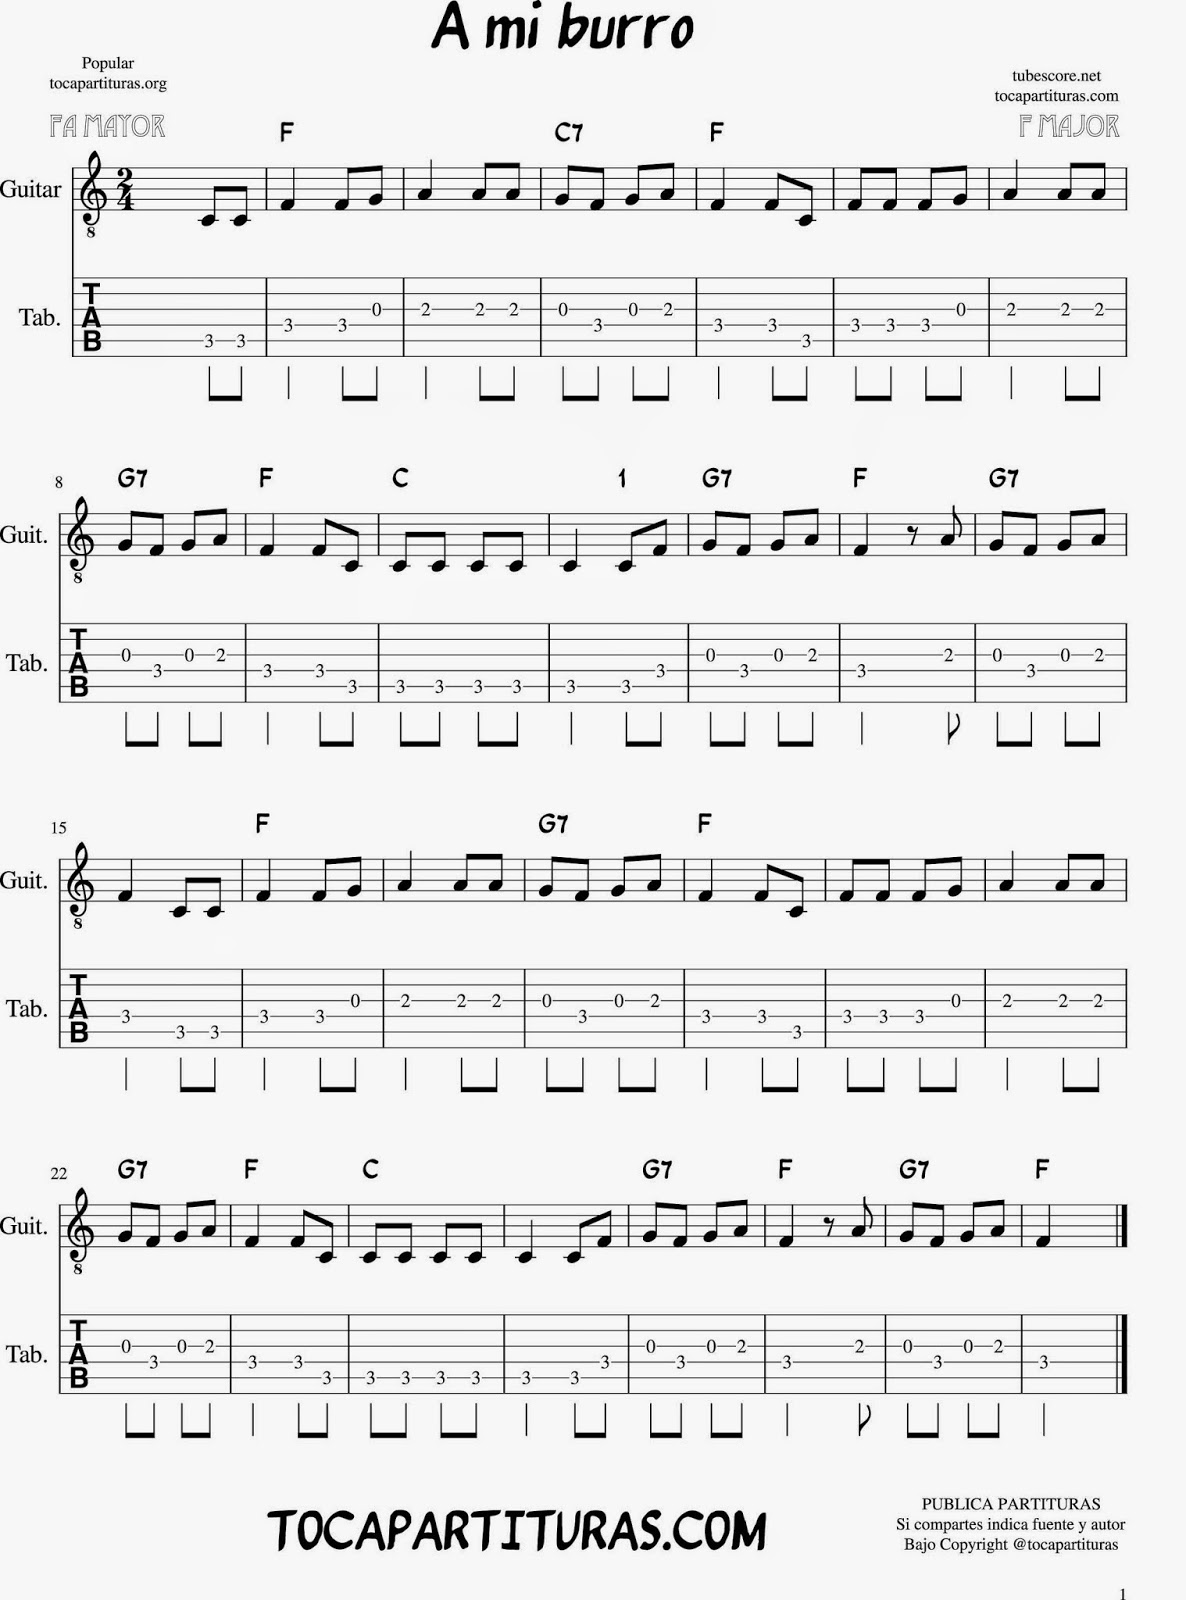 Tubescore My Donkey Tablature Sheet Music for Guitar in key F Major Popular Music Score for Kids Tab with Chords